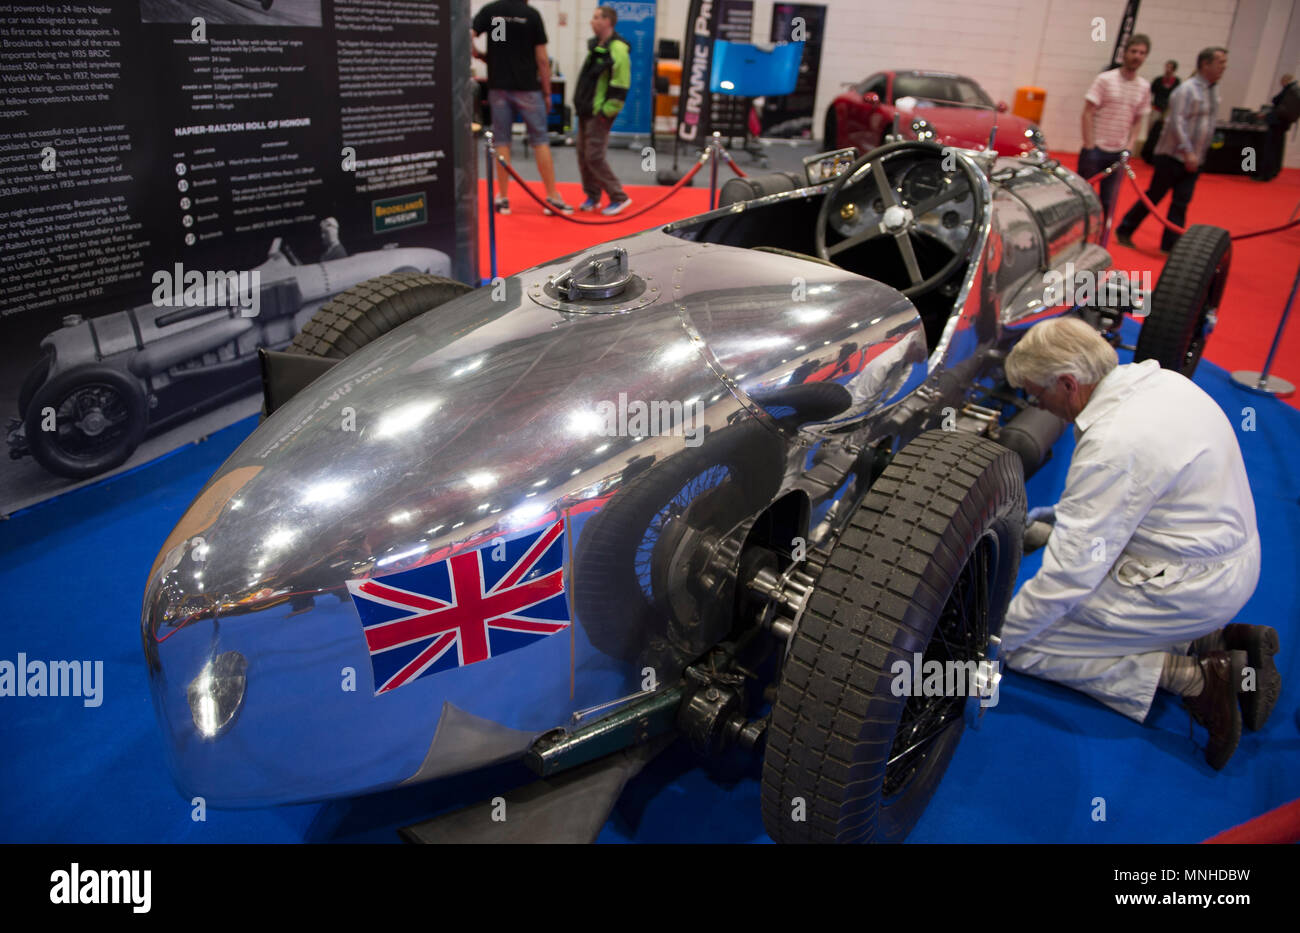 ExCel, London, UK. 17 May, 2018. The Confused.com London Motor Show event runs from 17-20 May 2018 with a space 4.5 times bigger than last year. Photo: The unique British built aero engine powered Napier Railton commissioned by John Cobb between 1933 and 1937 broke 47 World speed records. Credit: Malcolm Park/Alamy Live News. Stock Photo